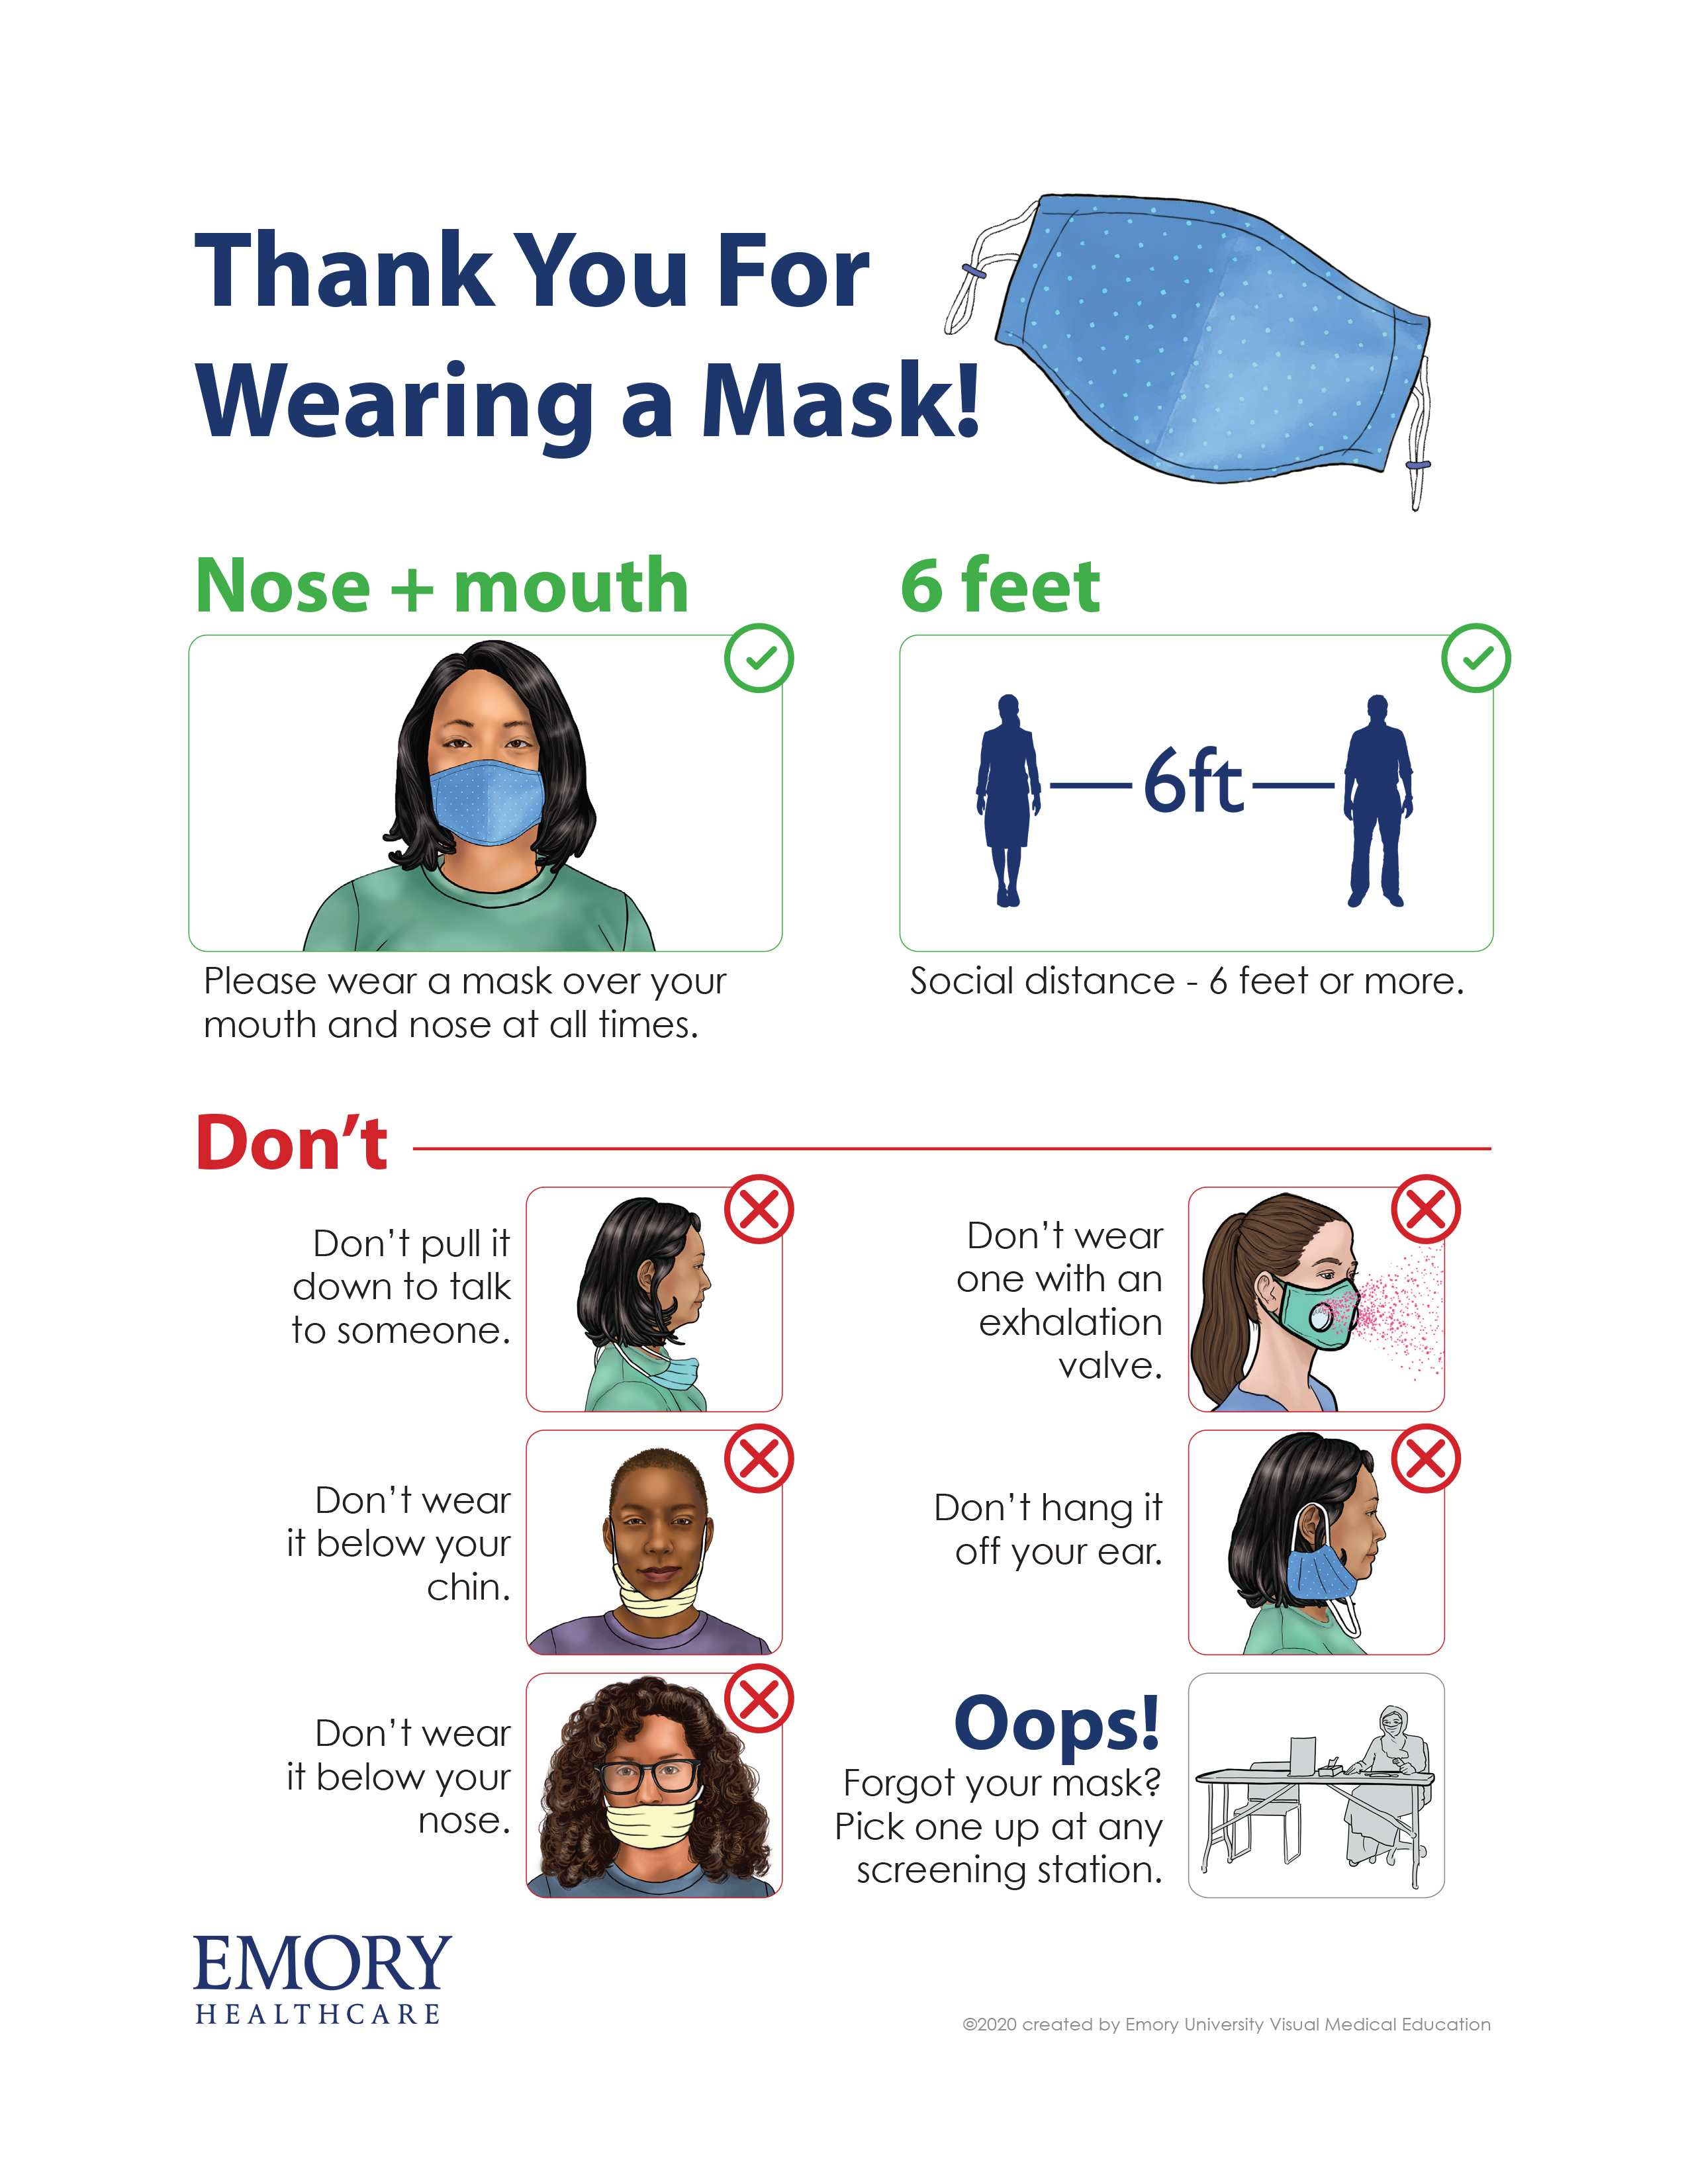 Thank You for Wearing a Mask: Illustrations to demonstrate the proper and improper use of a mask when visiting Emory locations.